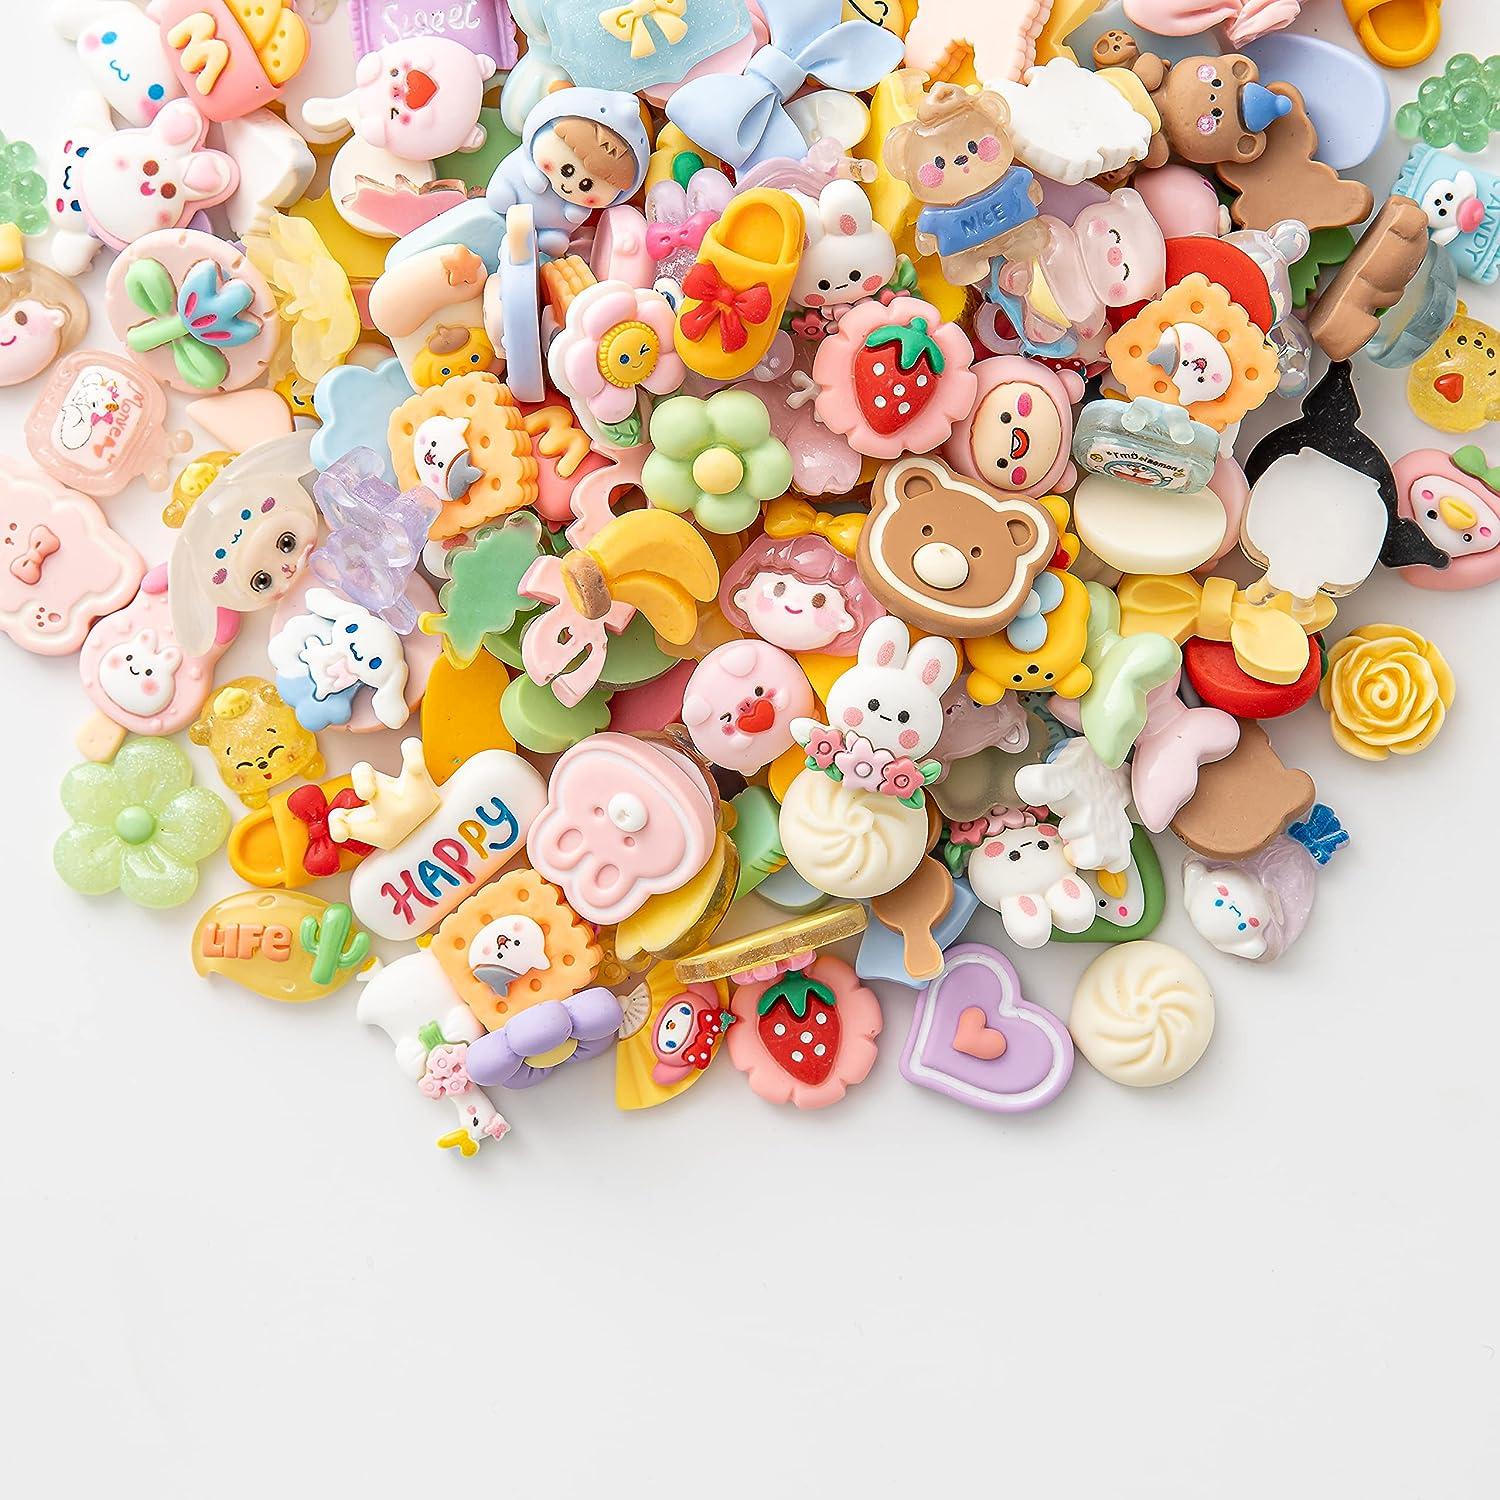 Slime Charms Cartoon Animal and Fruit Cute Set - Mixed Lot Assorted Resin  Flatback Sets for DIY Crafts  Making,Decorations,Scrapbooking,Embellishments,Hair Clip 25pcs - Yahoo  Shopping